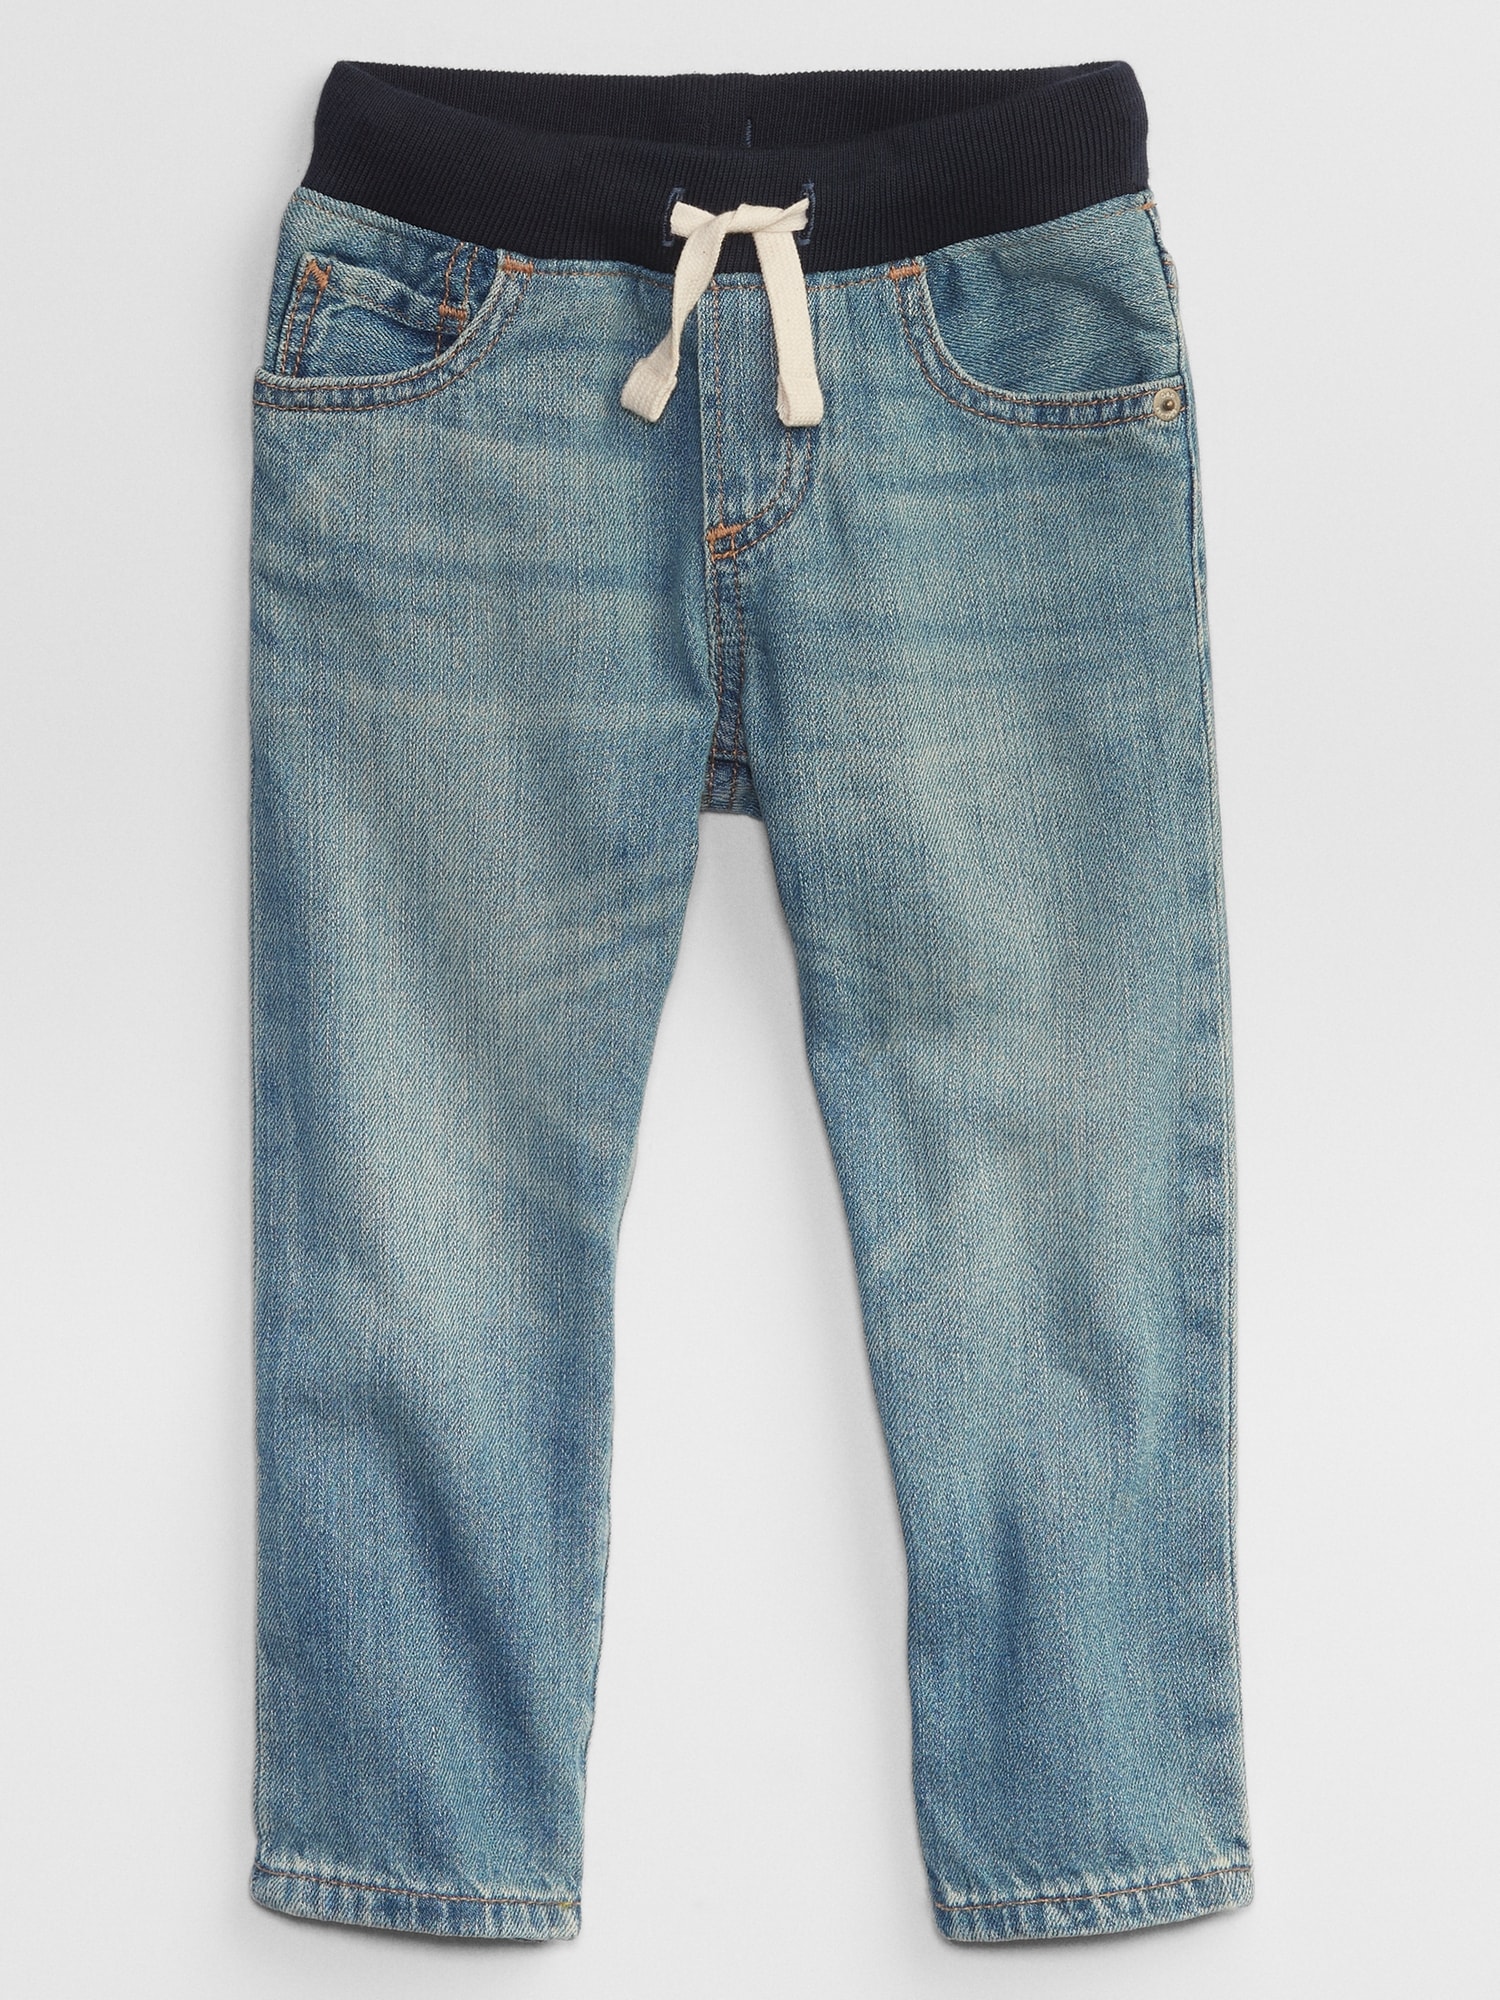 Distressed Jeans - easyfit comfortable and stylish pullon style jeans